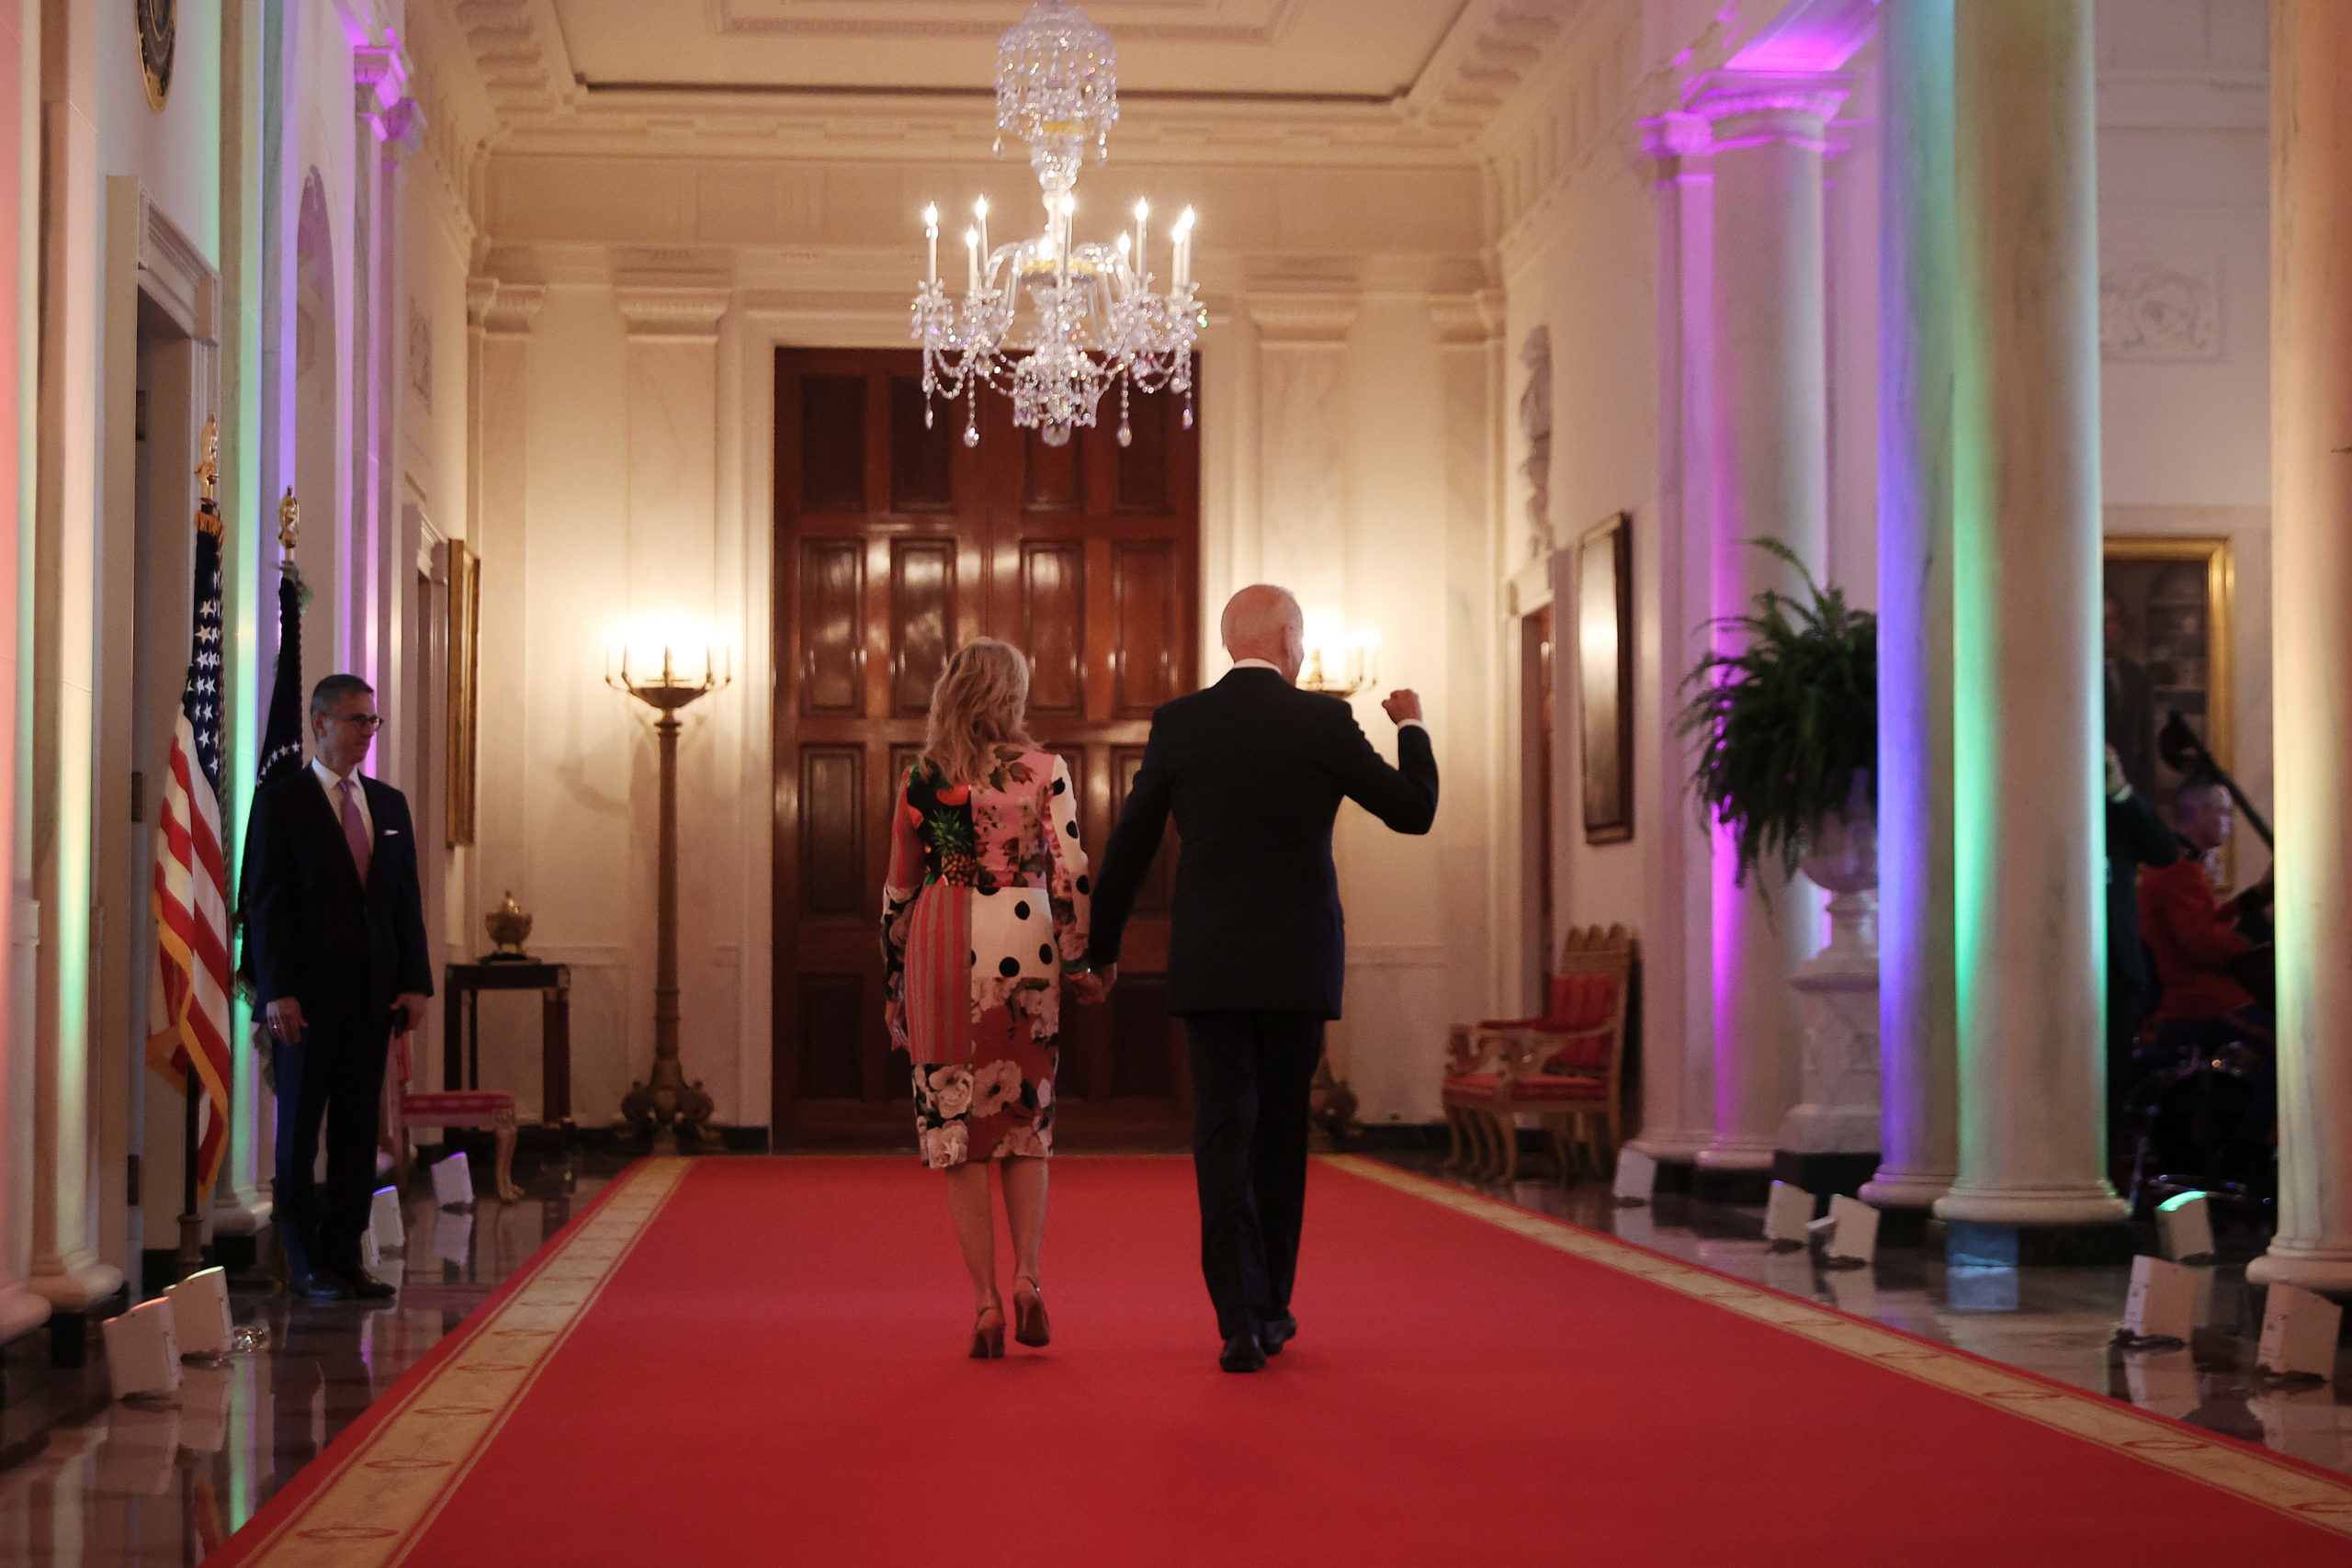 WASHINGTON, DC - JUNE 25: U.S. President Joe Biden and first lady Jill Biden walk through the Cross Hall lit with rainbow colors following an event commemorating LGBTQ+ Pride Month in the East Room of the White House on June 25, 2021 in Washington, DC. Biden celebrated the accomplishments of past and present LGBTQ+ public service leaders and said there was still more work to be done. (Photo by Chip Somodevilla/Getty Images)